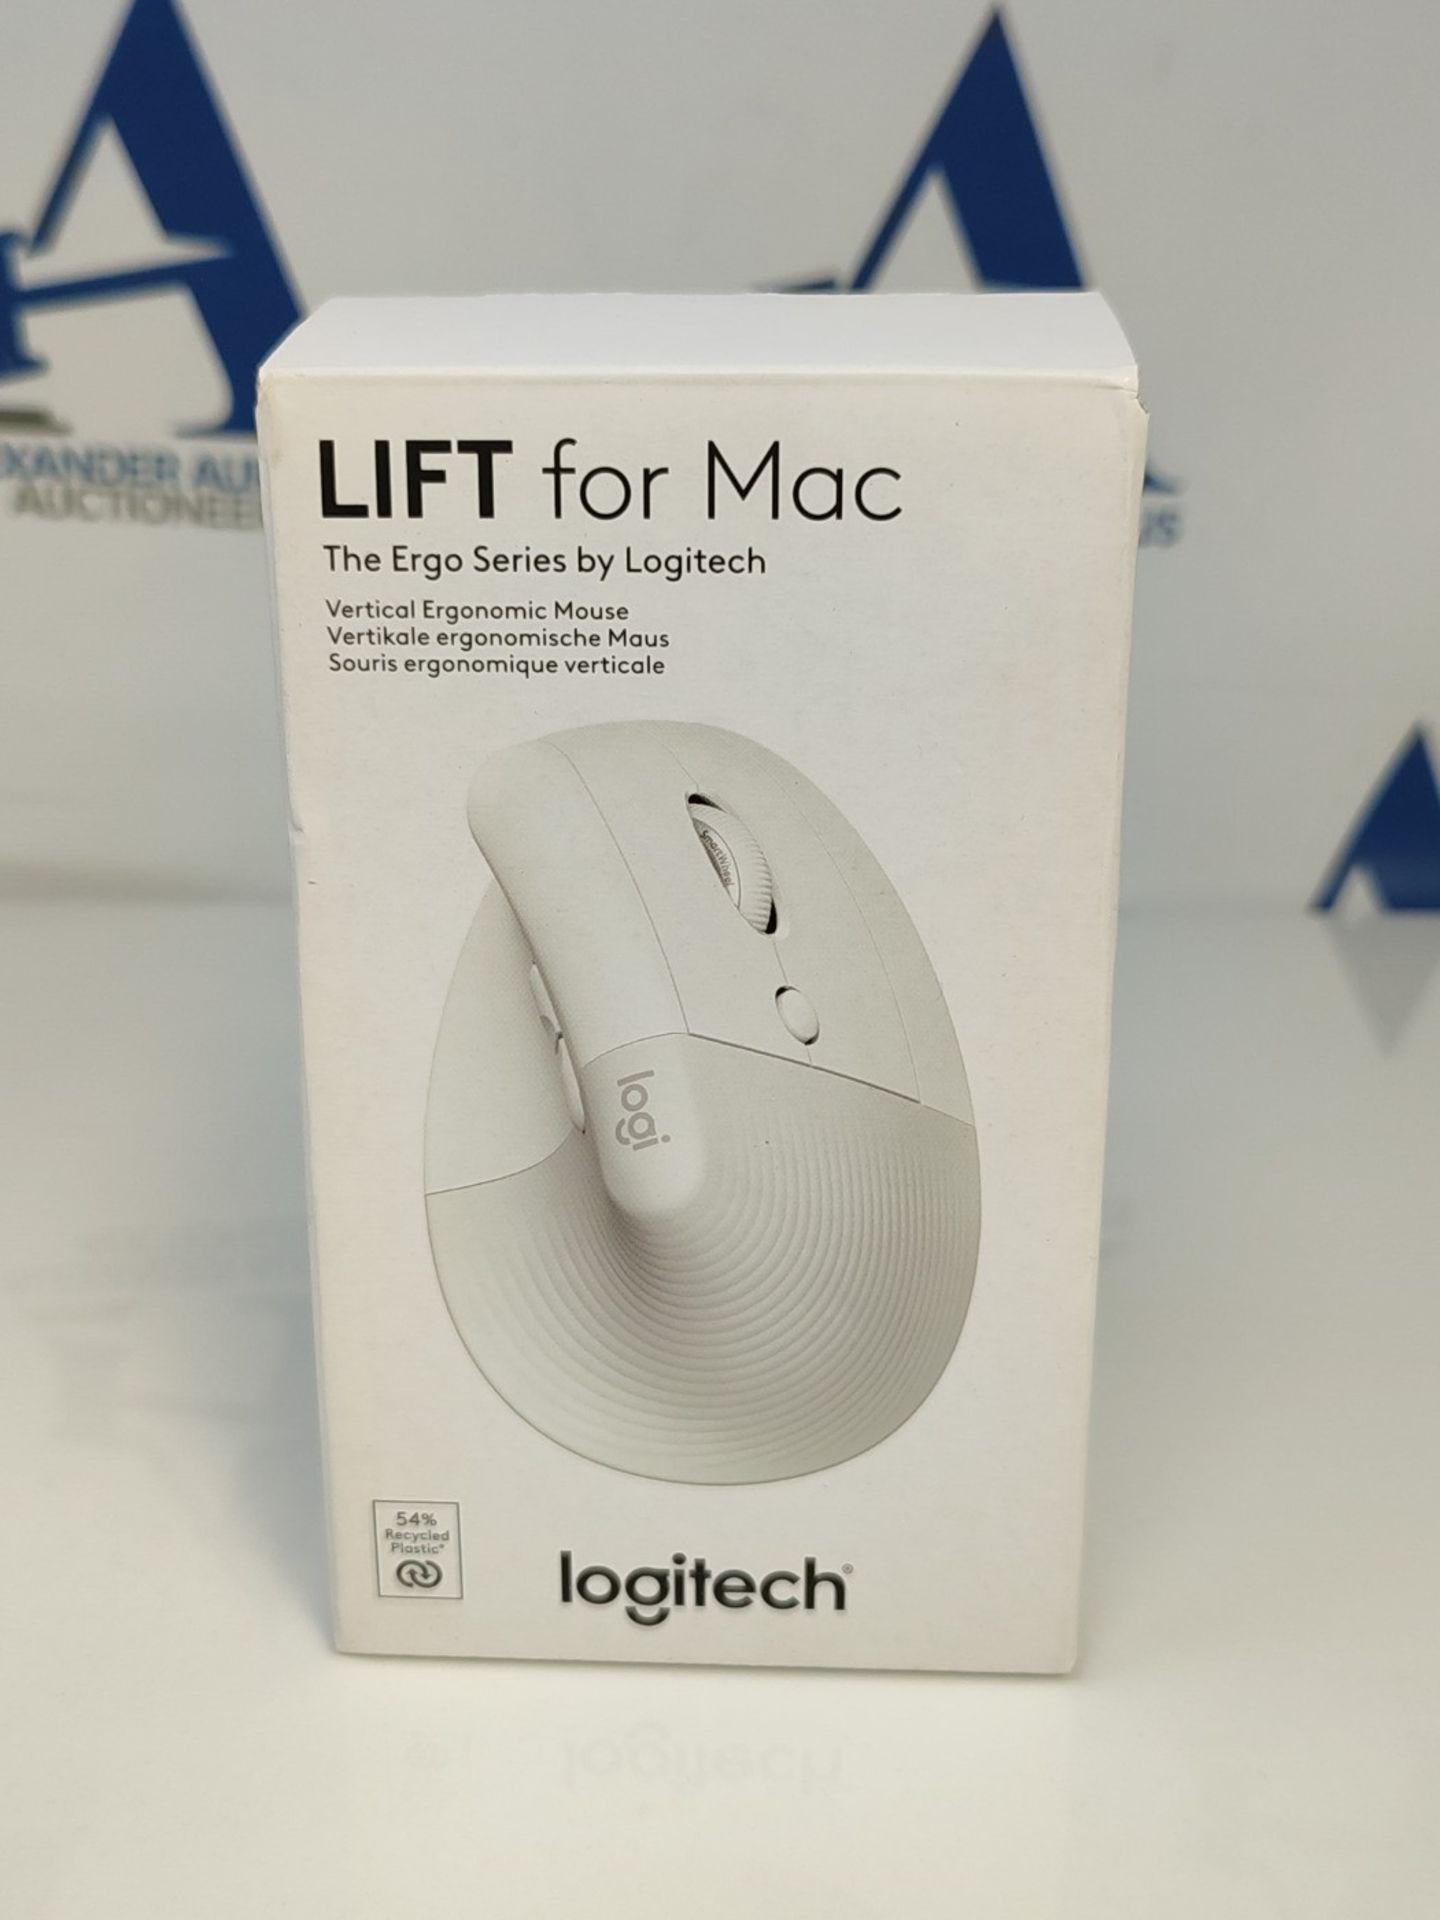 RRP £54.00 [INCOMPLETE] Logitech Lift for Mac, ergonomic wireless mouse, Bluetooth, silent click, - Image 2 of 3